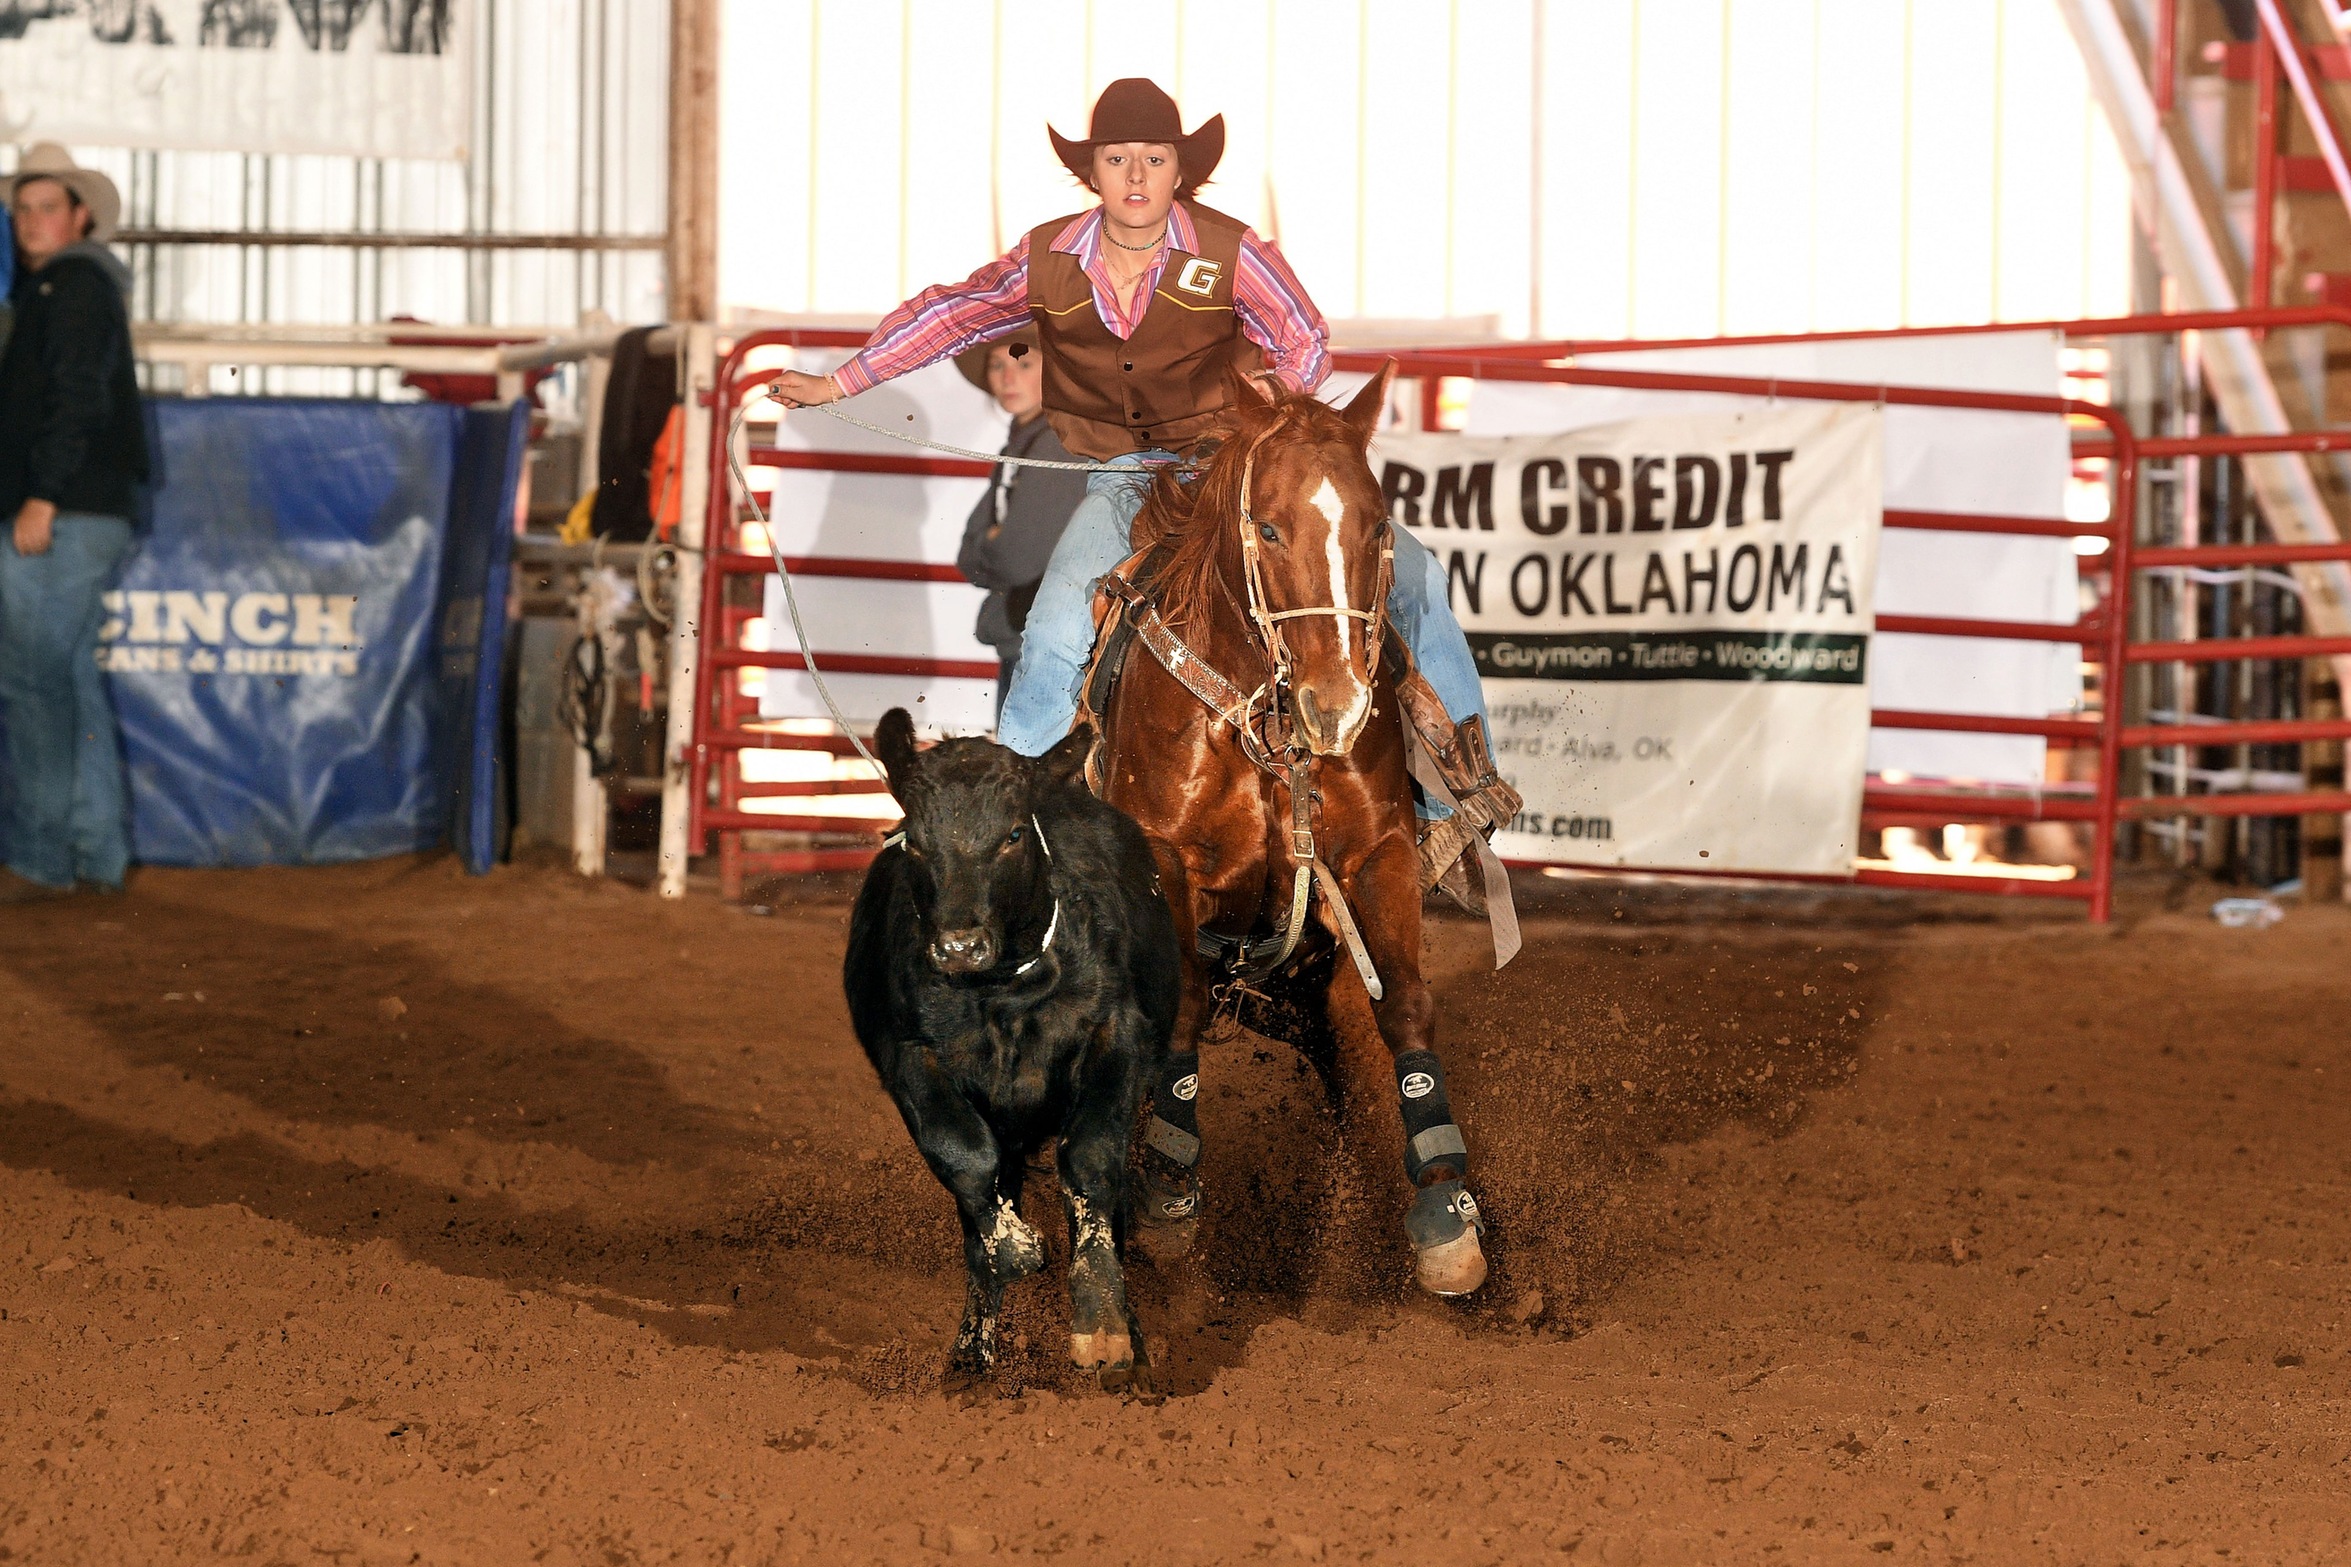 Ast paces Broncbuster women at NWOSU Rodeo